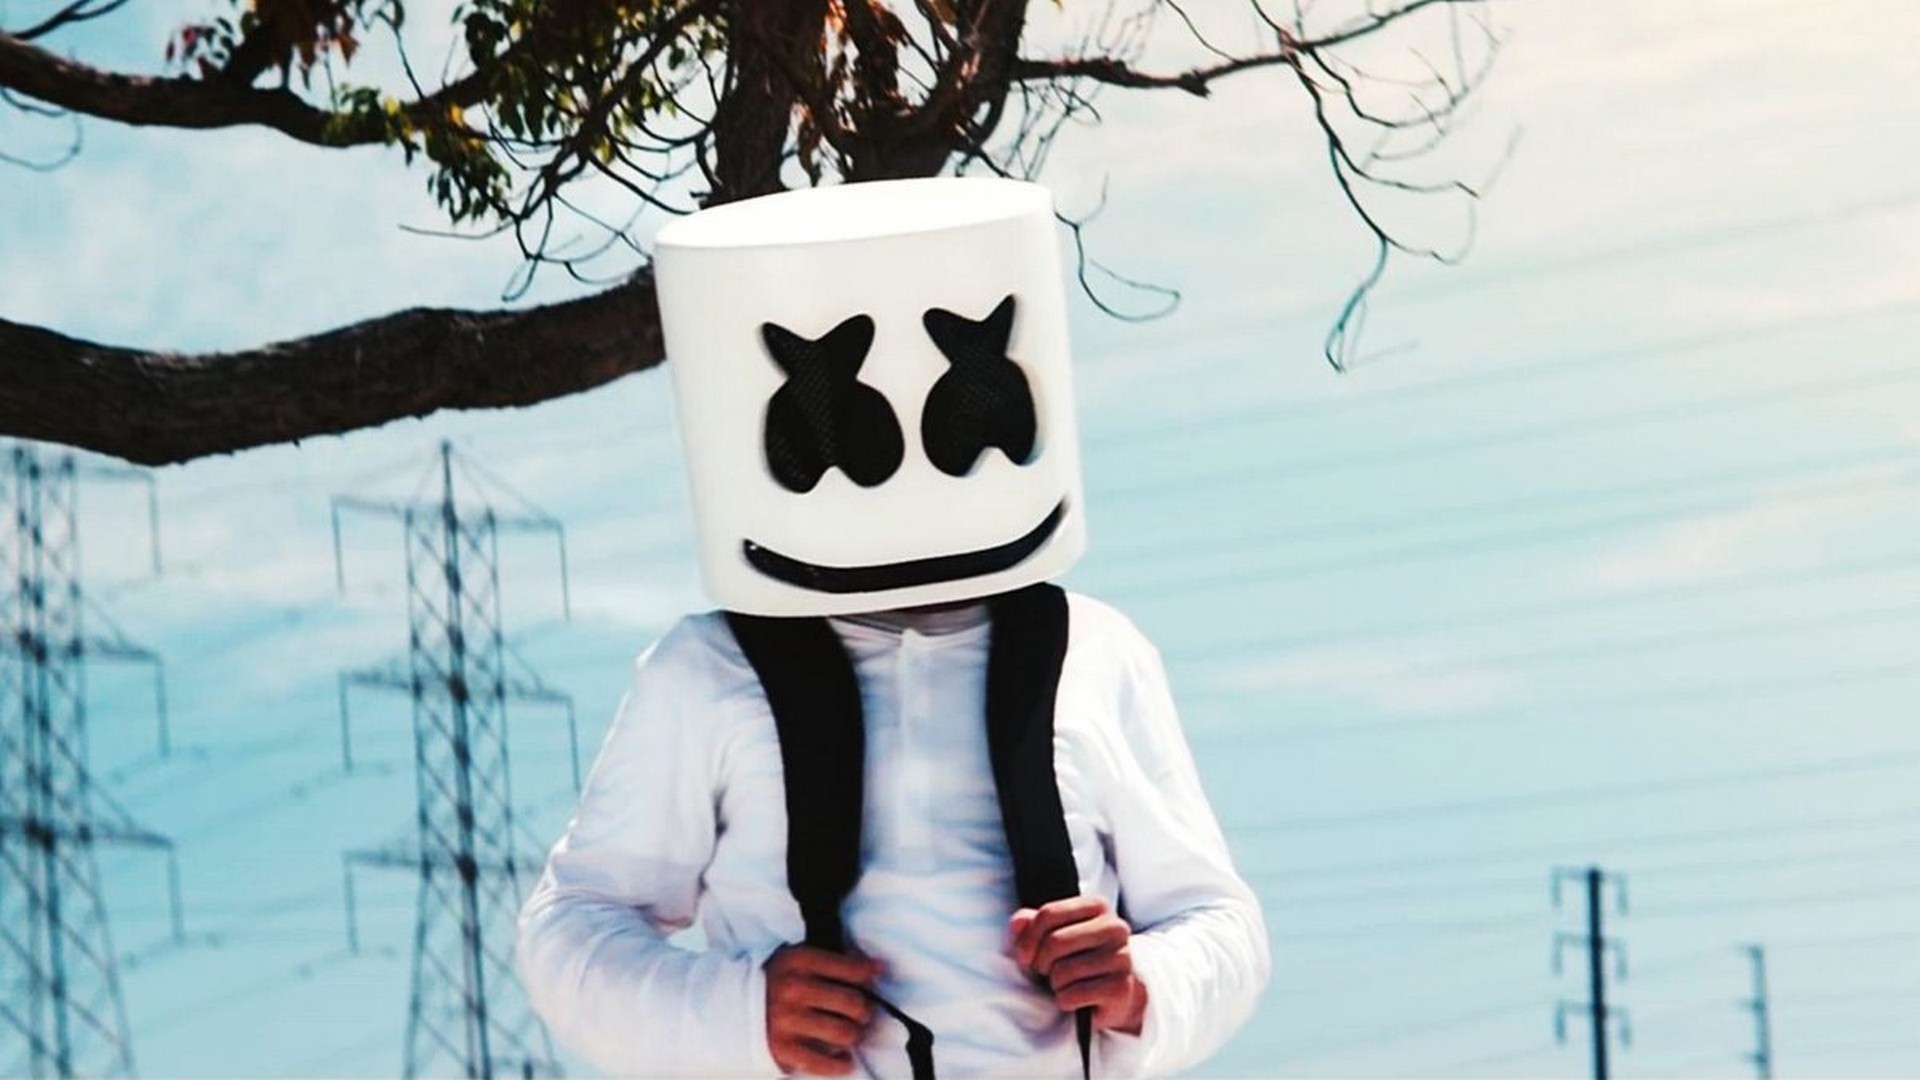 Wallpaper Marshmello Desktop with high-resolution 1920x1080 pixel. You can use this wallpaper for your Windows and Mac OS computers as well as your Android and iPhone smartphones